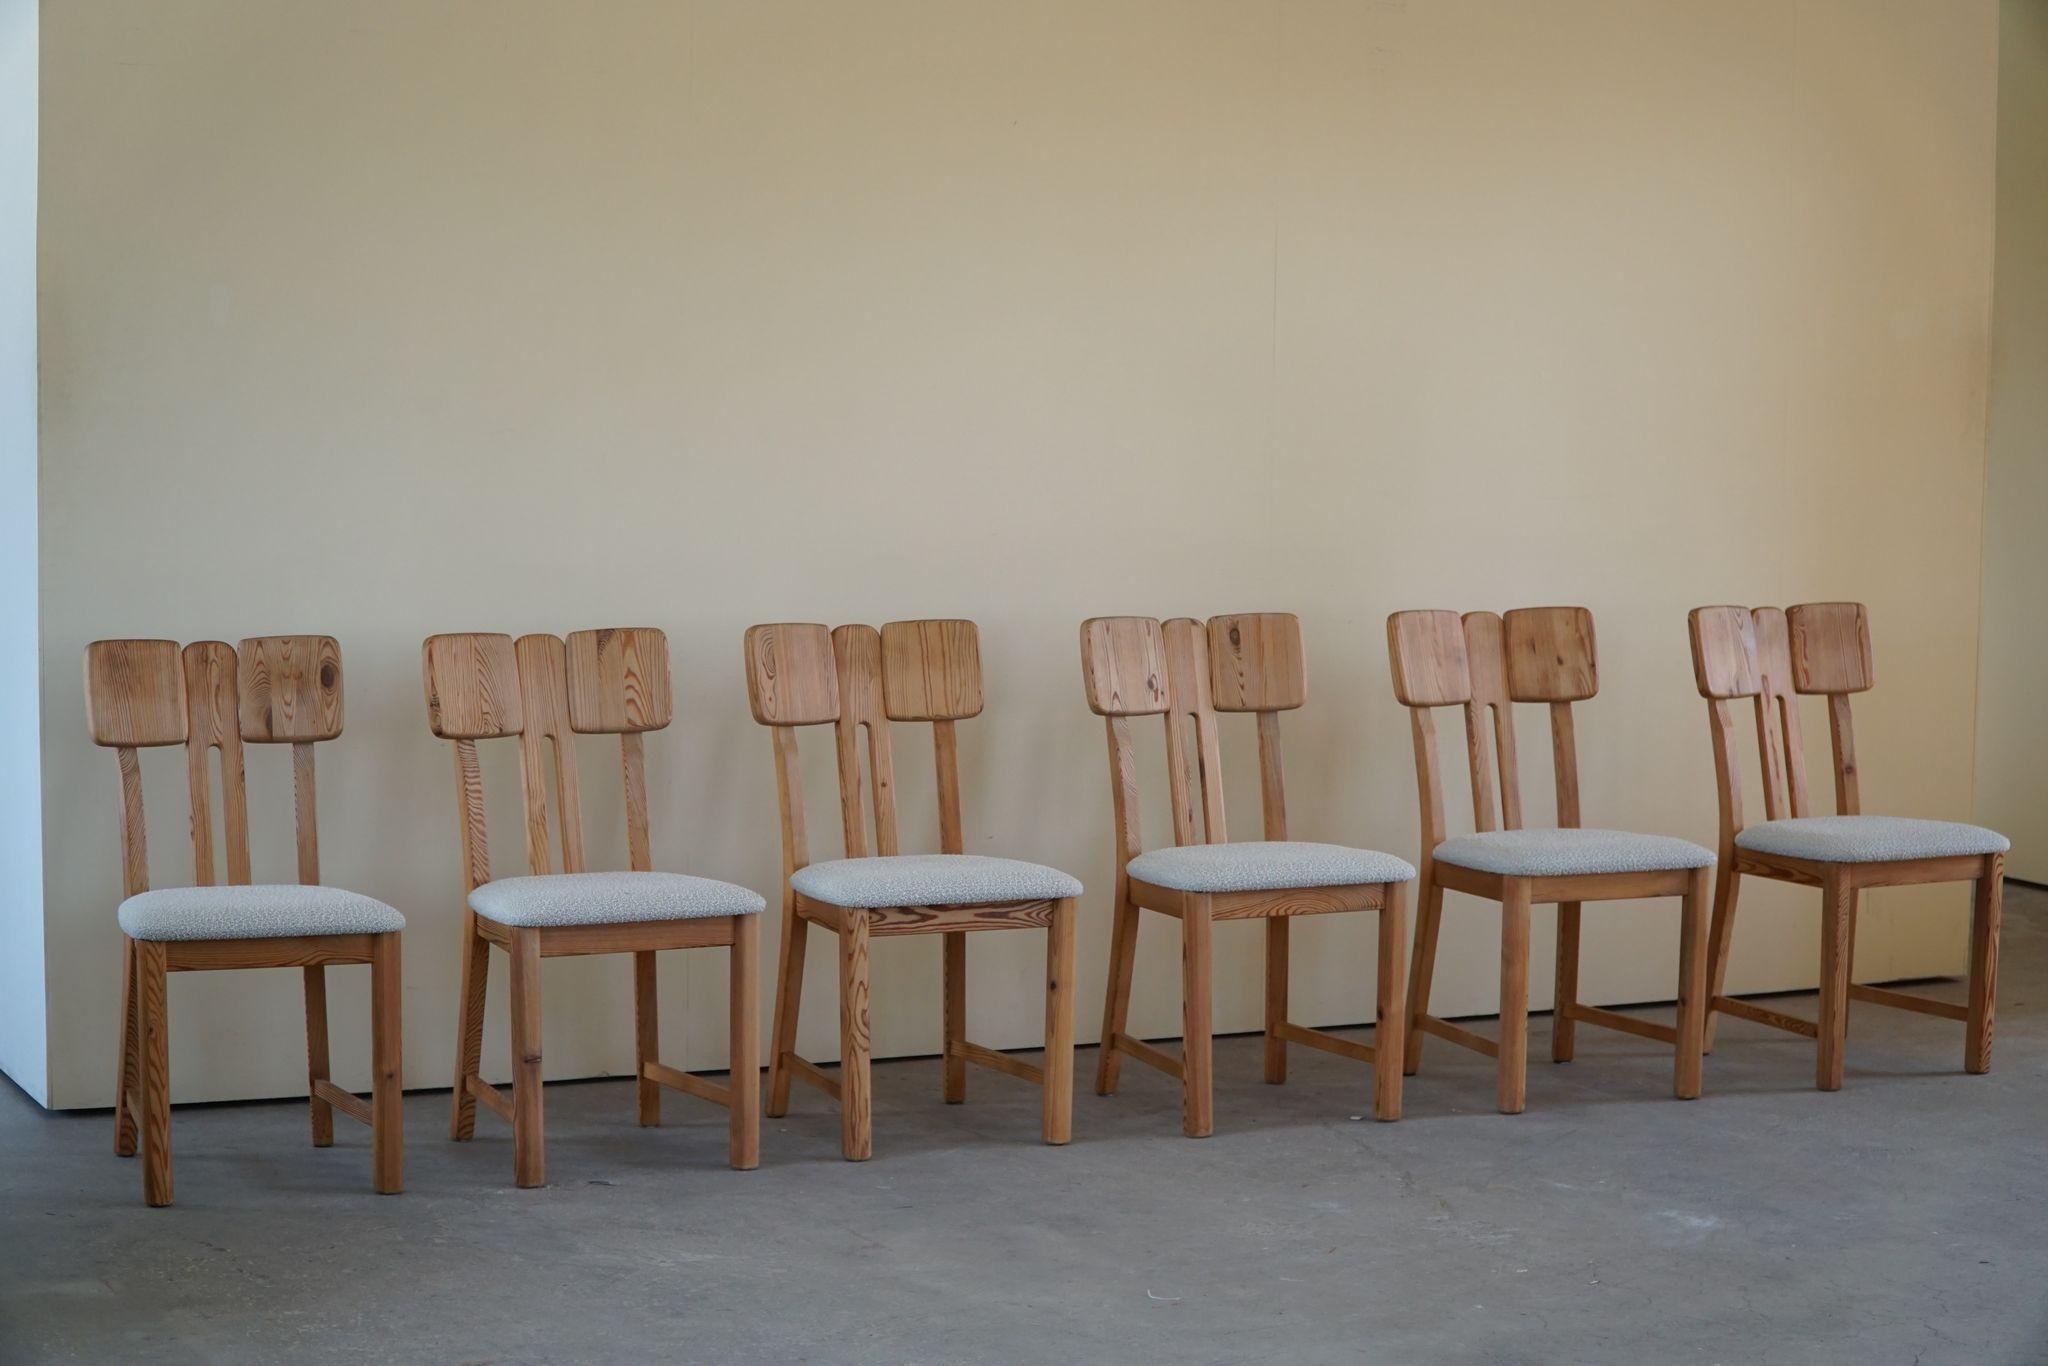 Set of 6 sculptural dining chairs in solid douglas pine, reupholstered in wool. Made by a Danish Cabinetmaker in 1970s. These brutalist chairs have a really strong impression that pair well with many types of interior styles. A Modern, Scandinavian,